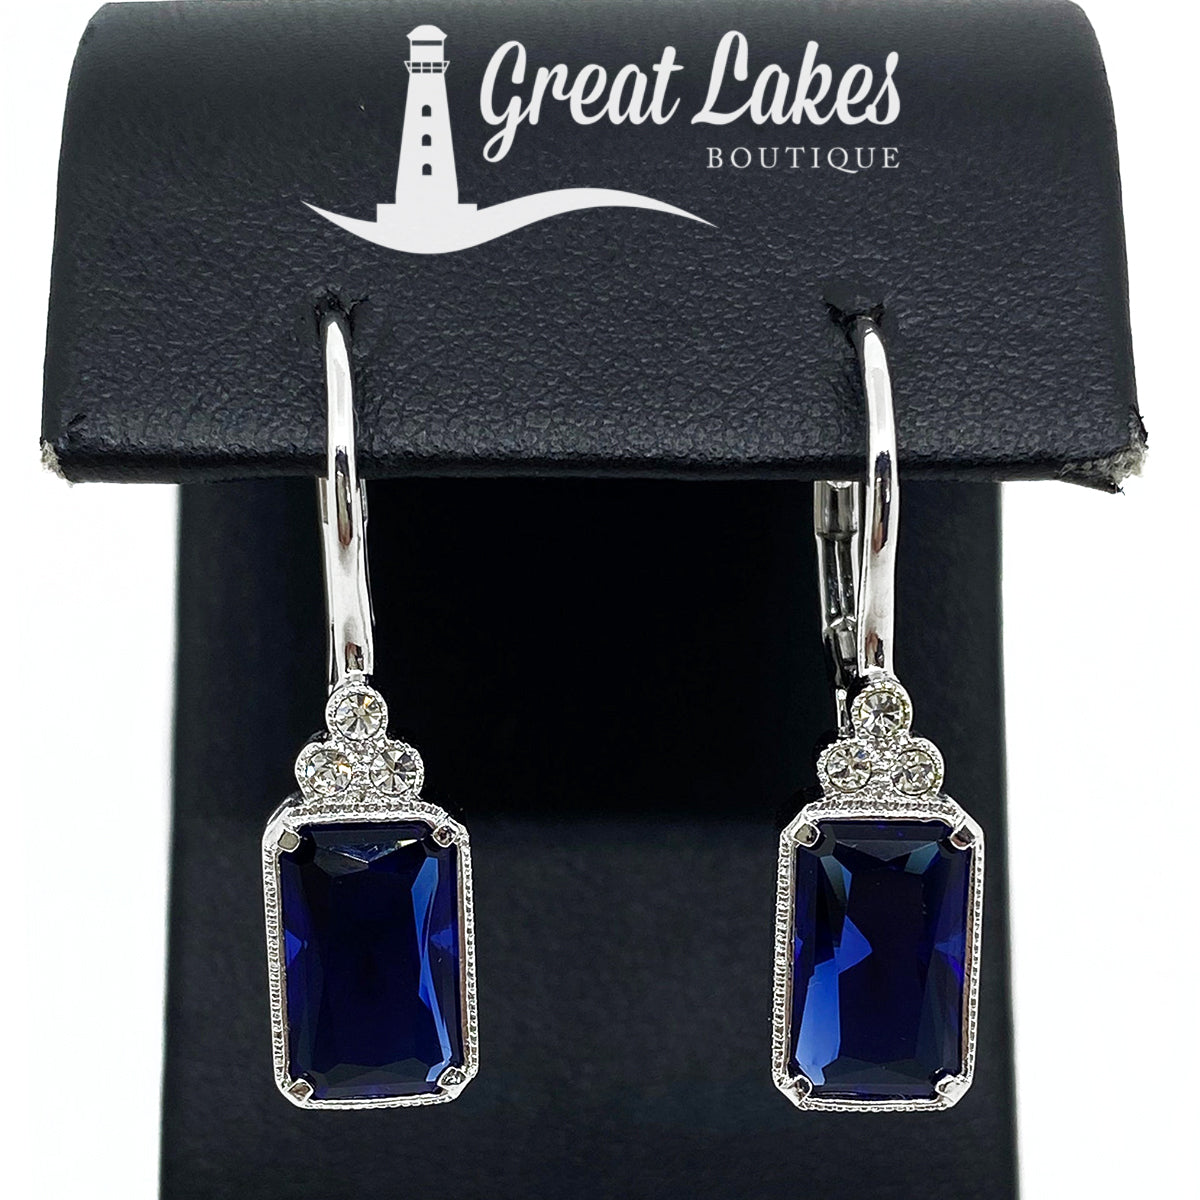 Great Lakes Boutique Silver &amp; Blue Cubic Zirconia Earrings